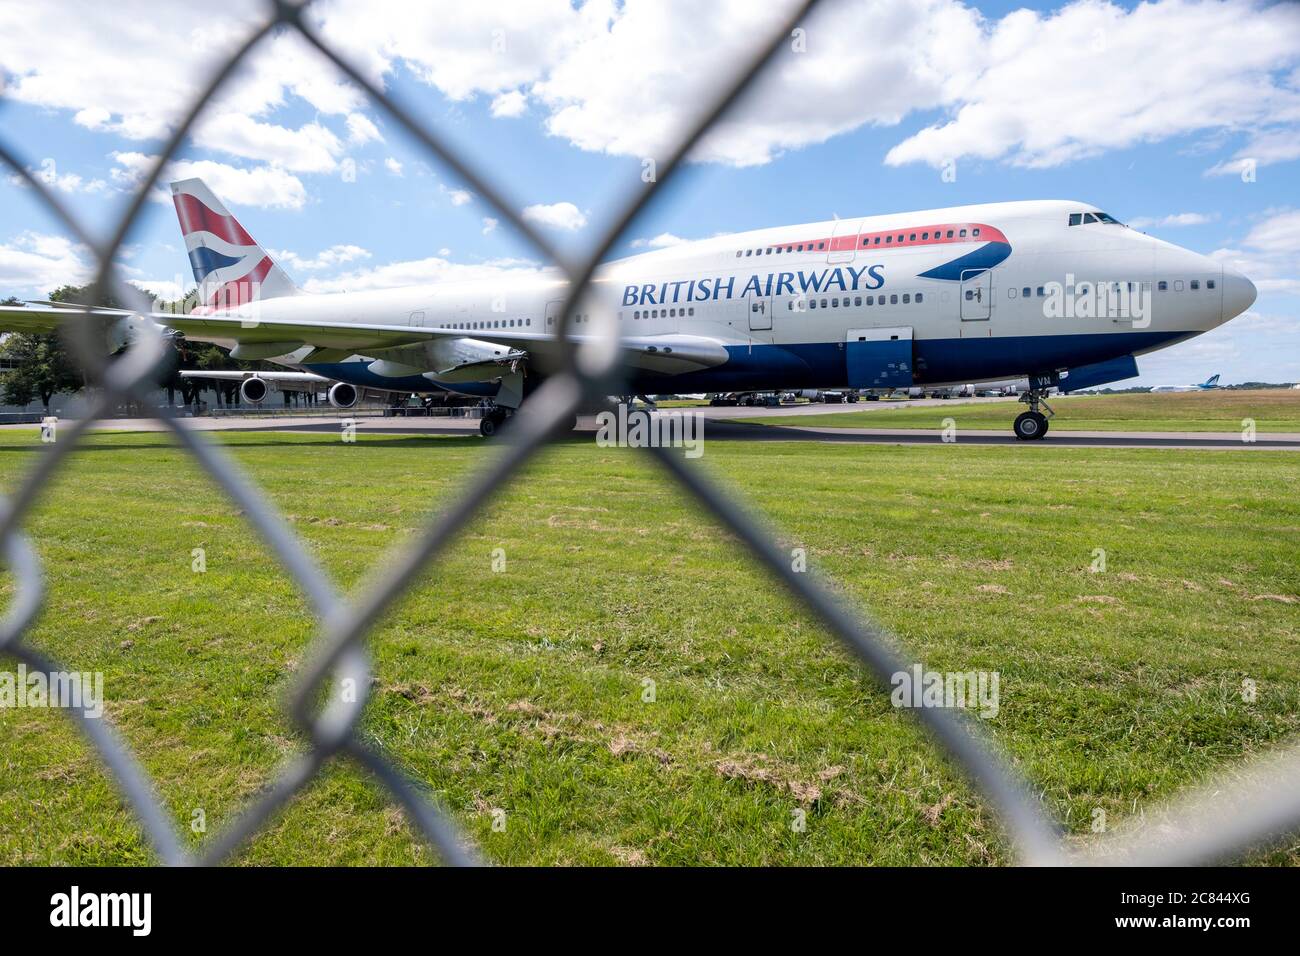 British Airways has recently announced the retirement of it's fleet of 747 aircraft, a decision brough forward due to the impact of the Coronavirus pandemic. This BA 747 is parked at Kemble airfield, Gloucestershire with It's engines allready removed. Based at the airfield 'Air Salvage international' dissasemble aircrfat for parts and scrap materials. Stock Photo